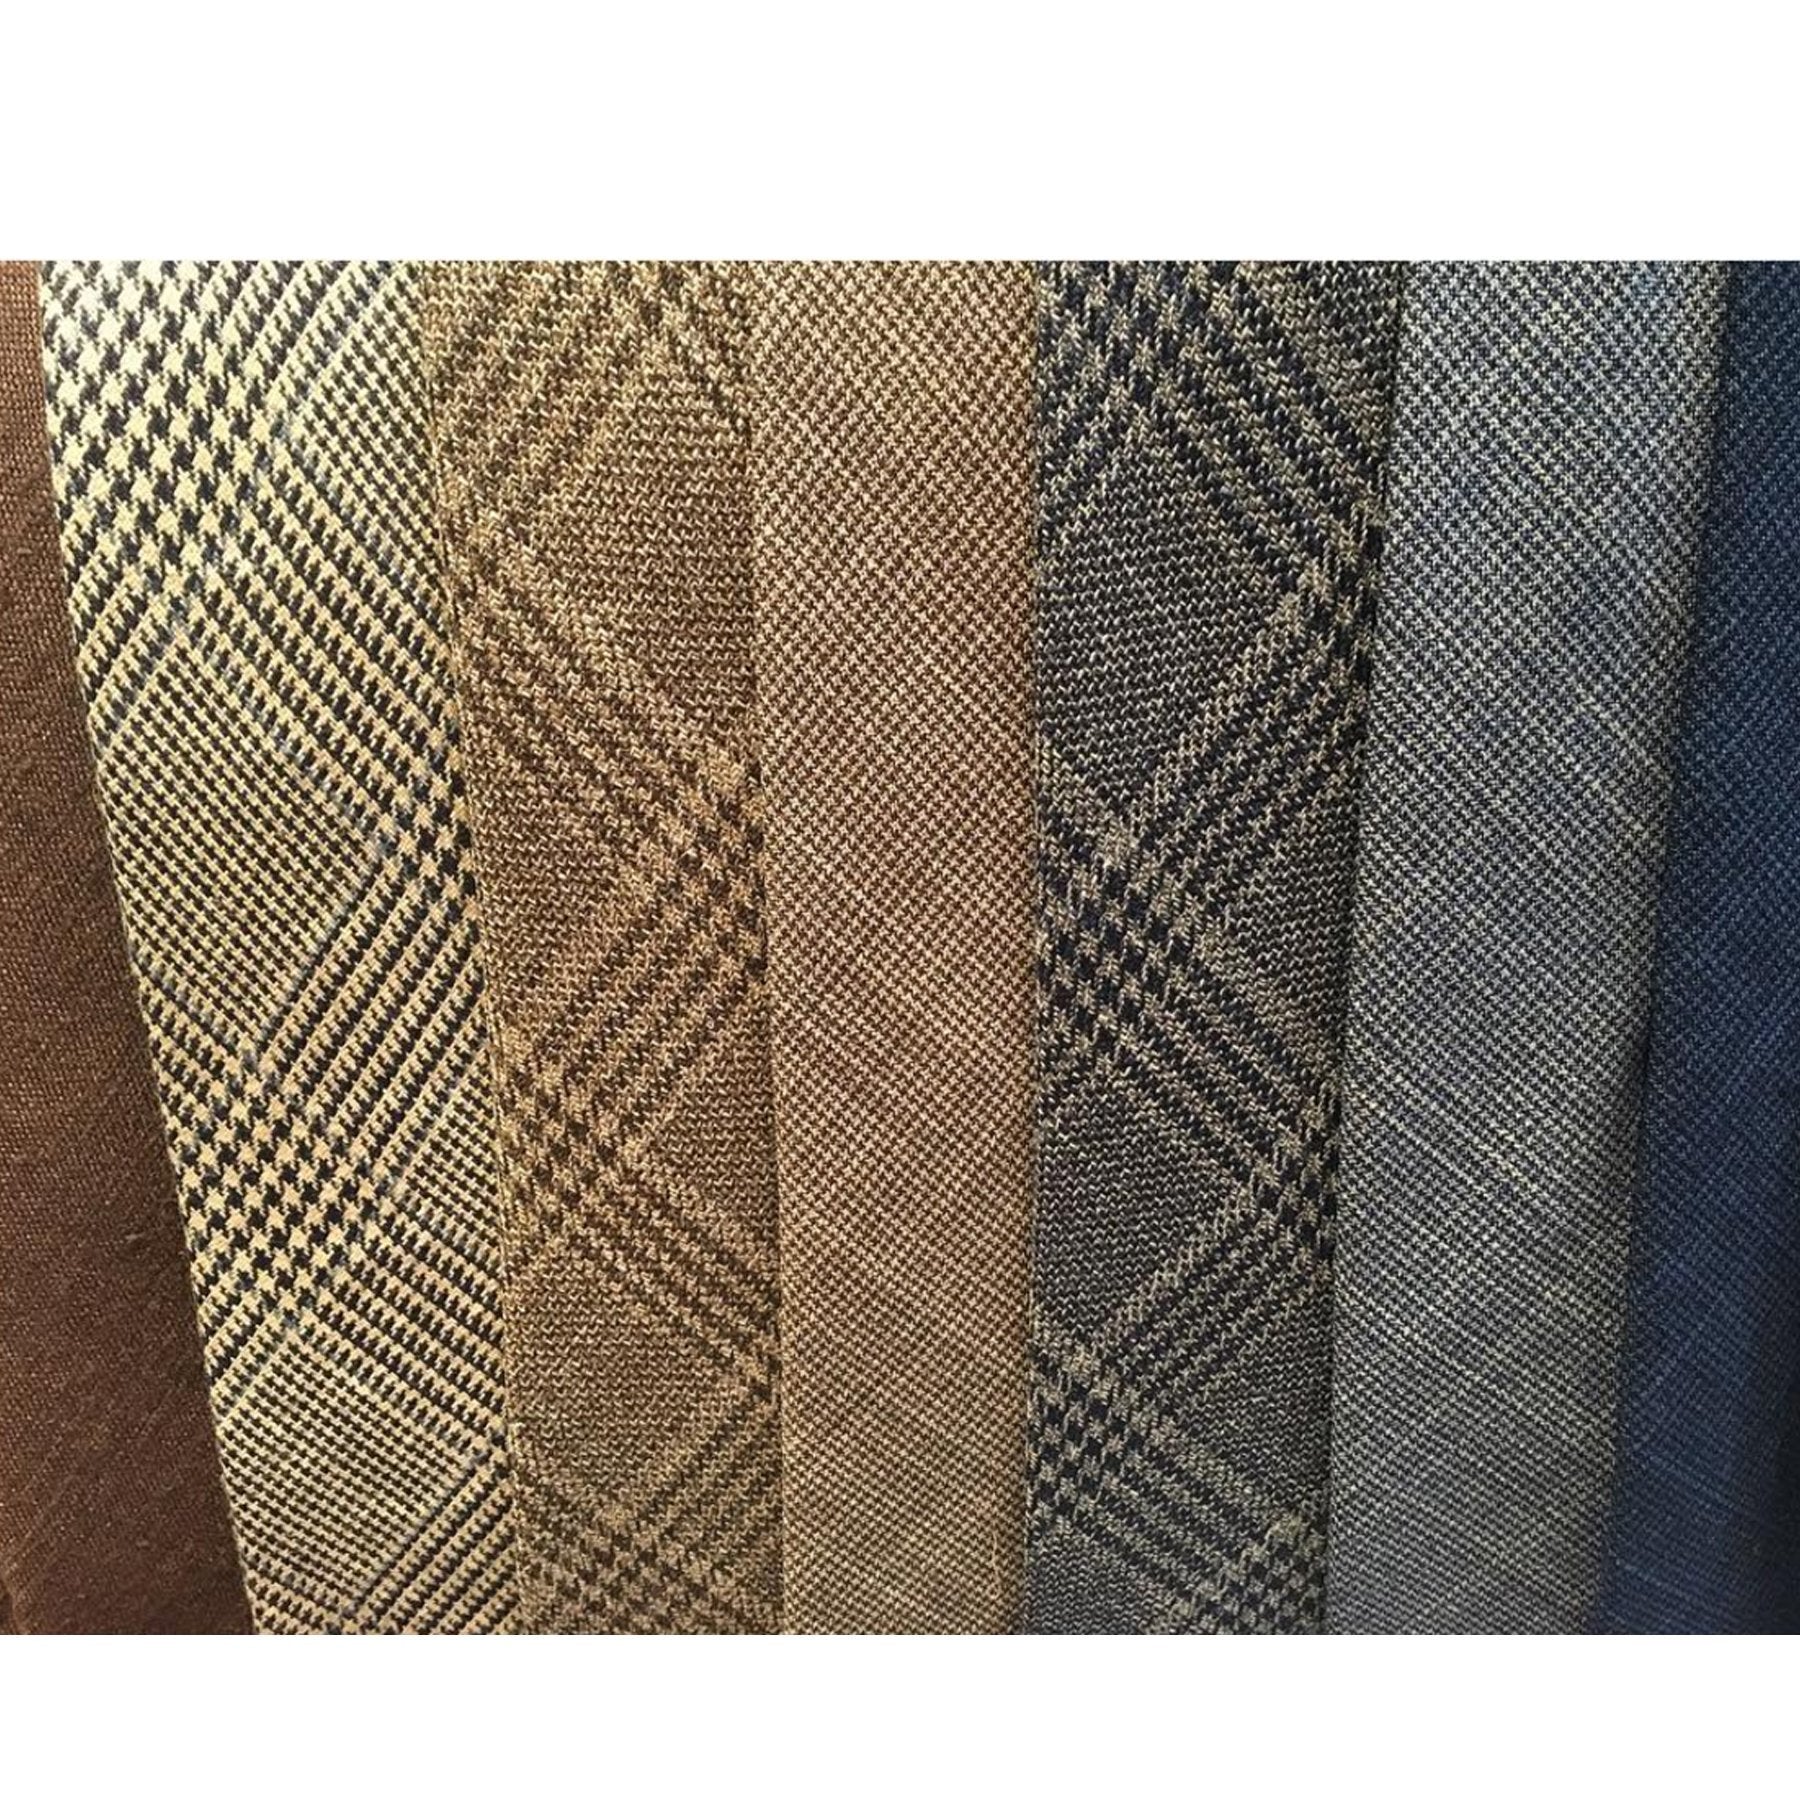 Woven Silk, Linen and finest wool in natural dyes create our Prince of Wales and Cross Hatch Spring tie collection. - Emma Willis